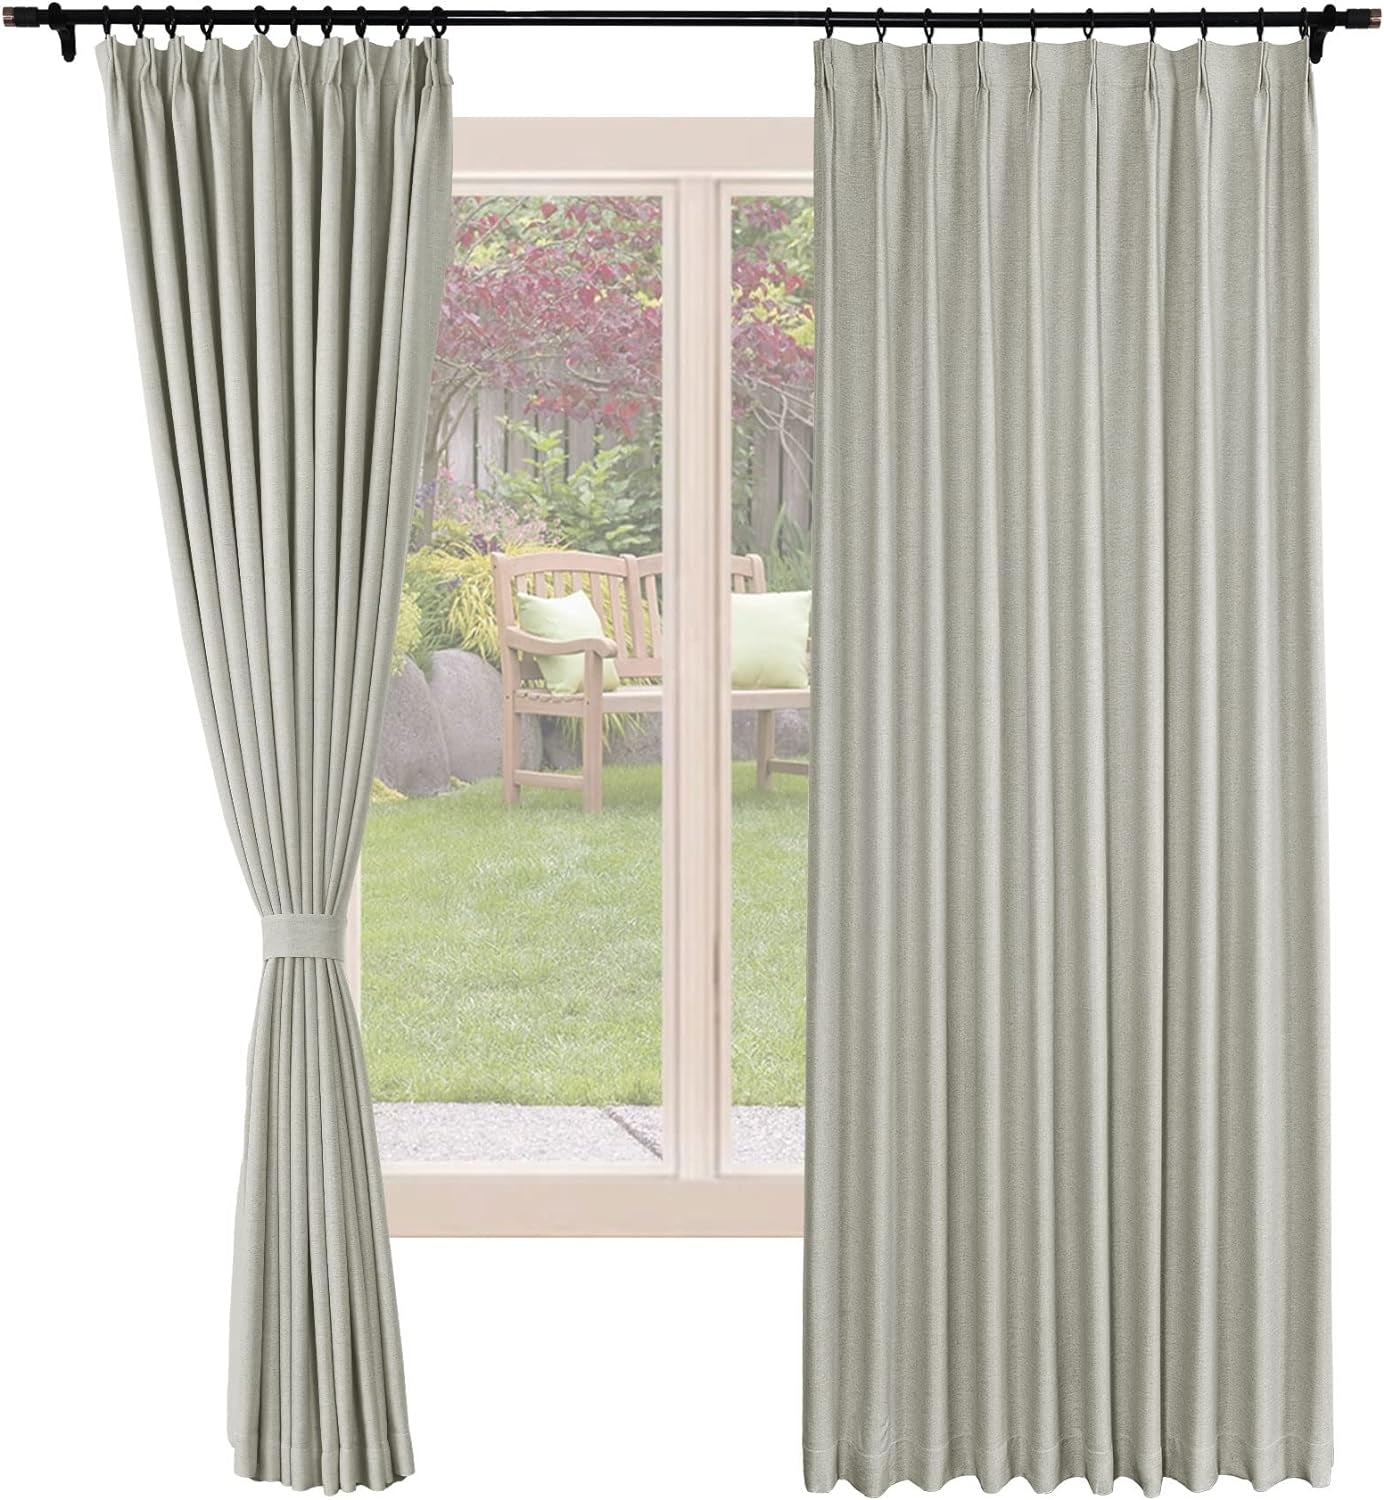 Frelement Blackout Curtains Natural Linen Curtains Pinch Pleat Drapery Panels for Living Room Thermal Insulated Curtains, 52" W X 63" L, 2 Panels, Oasis  Frelement 35 Oasis (52Wx84L Inch)*2 